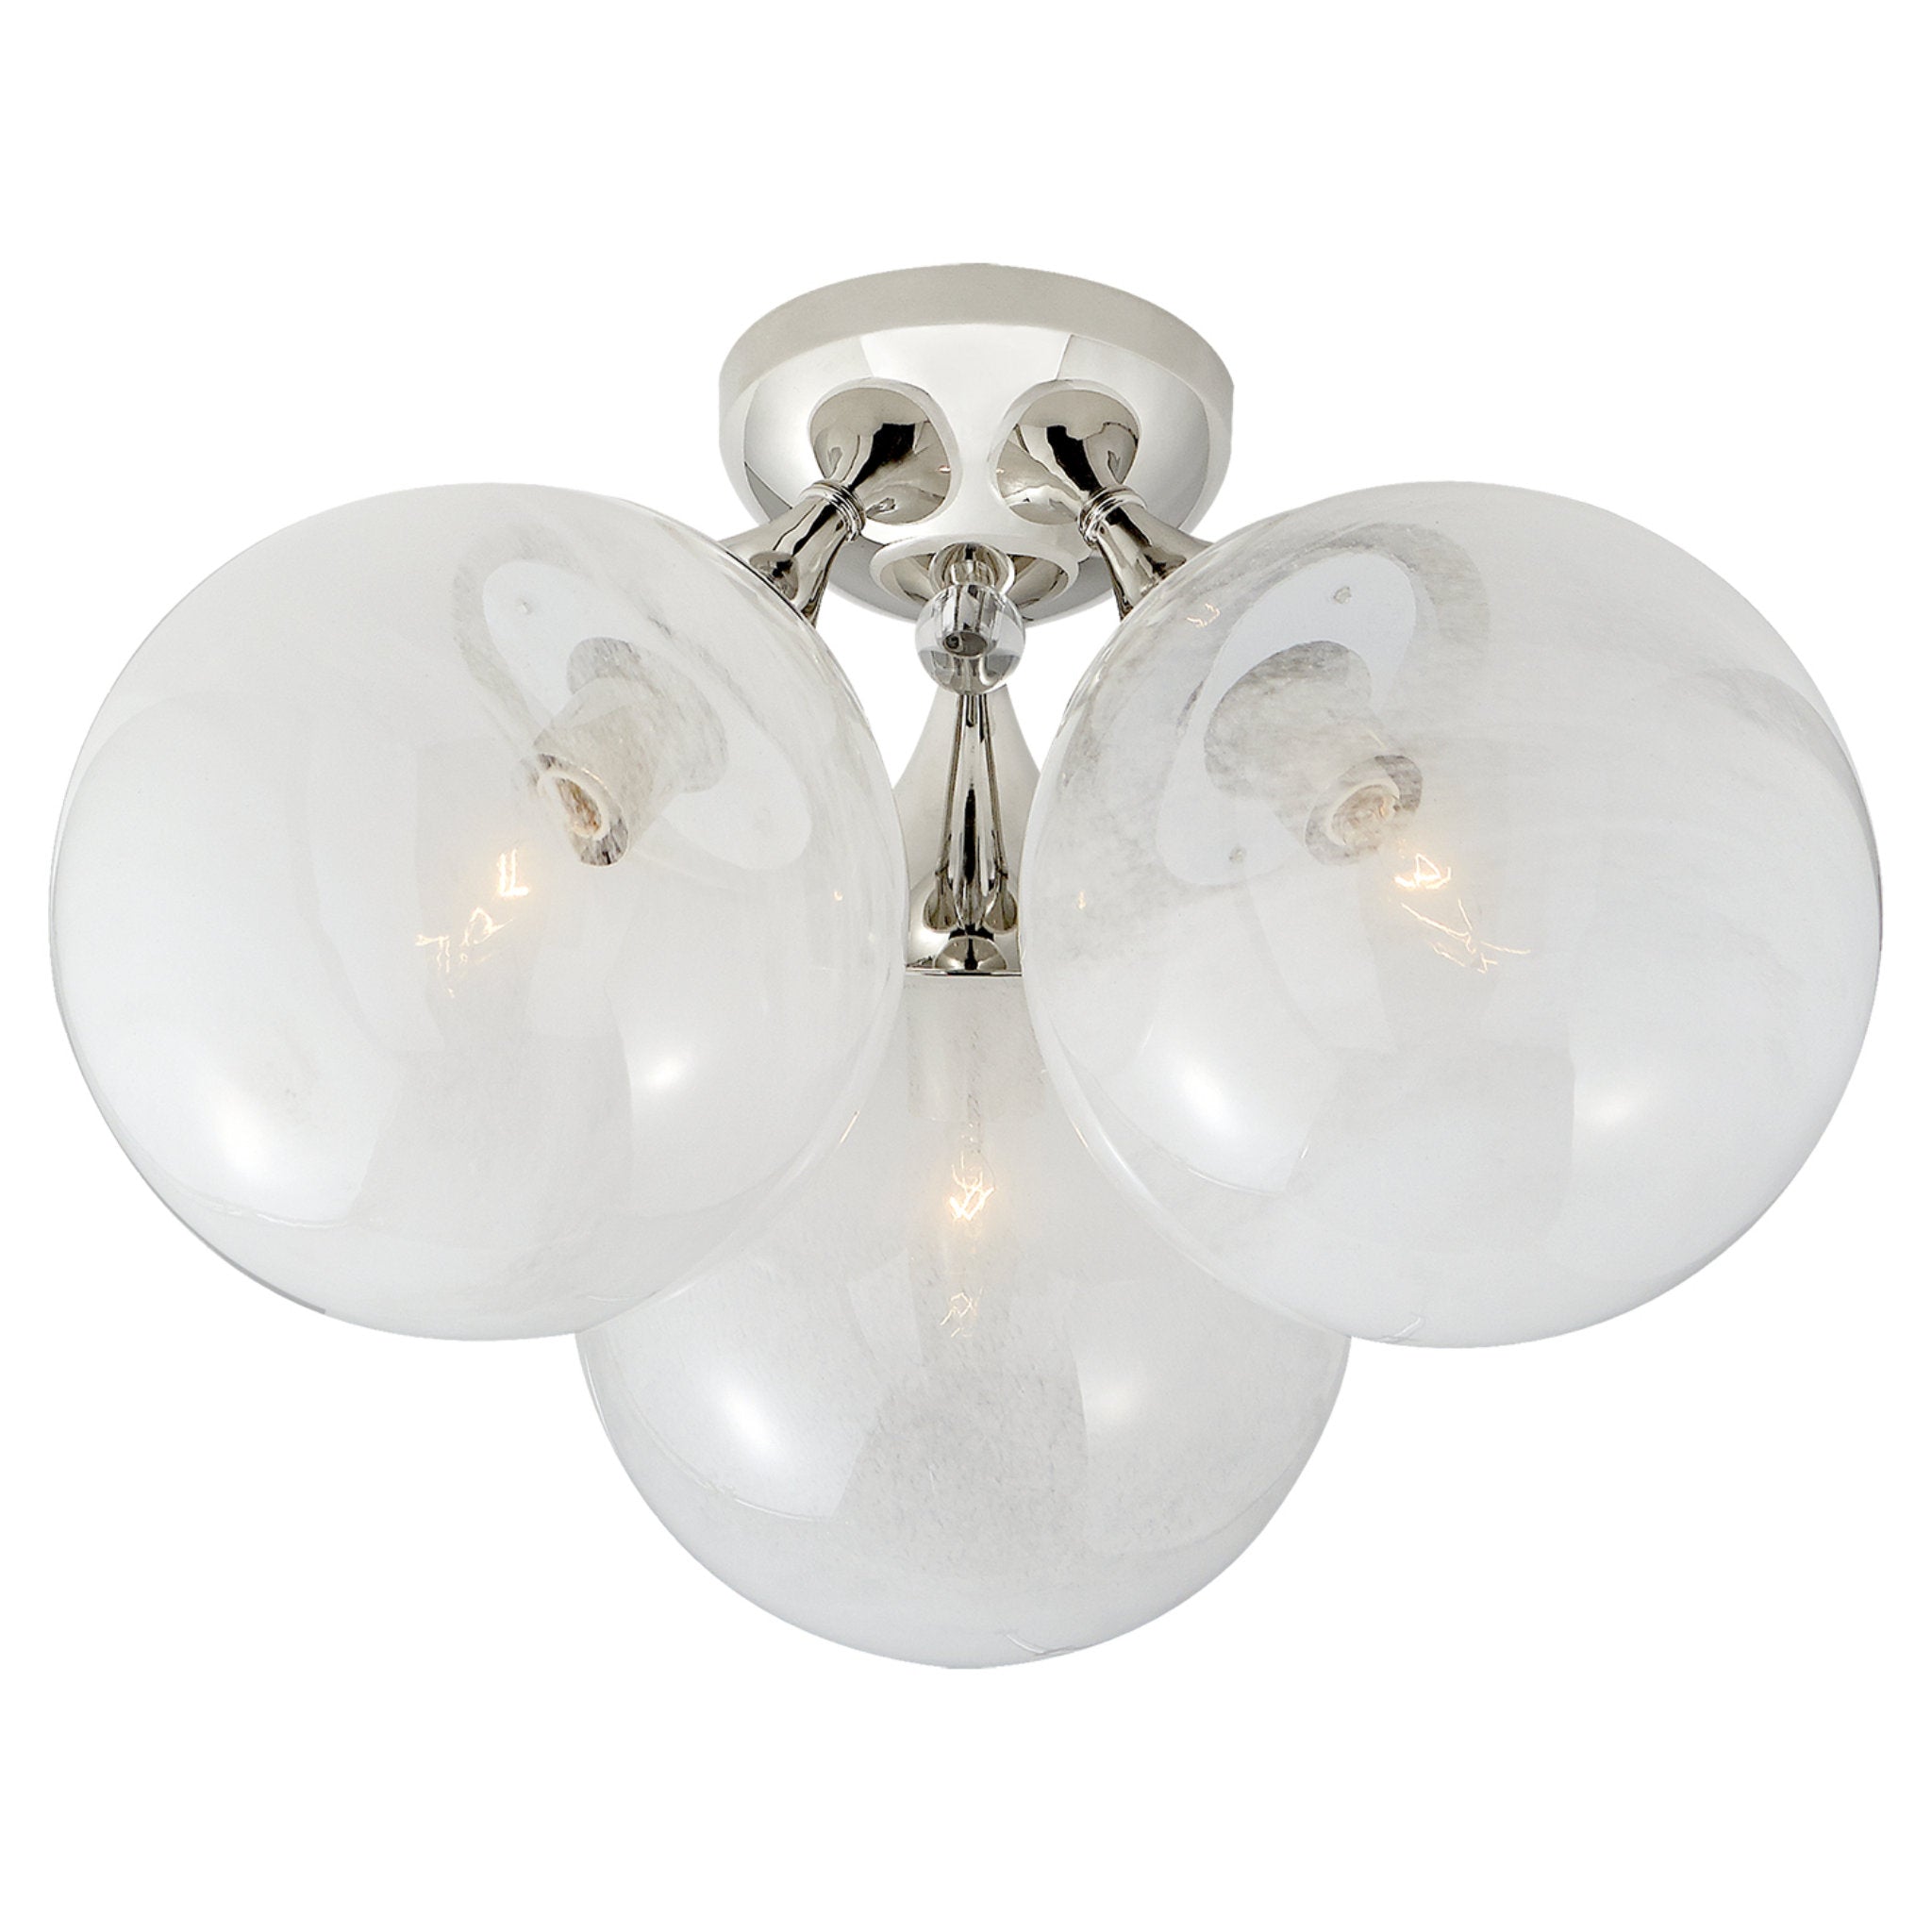 AERIN Cristol Large Triple Flush Mount in Polished Nickel with White Strie Glass